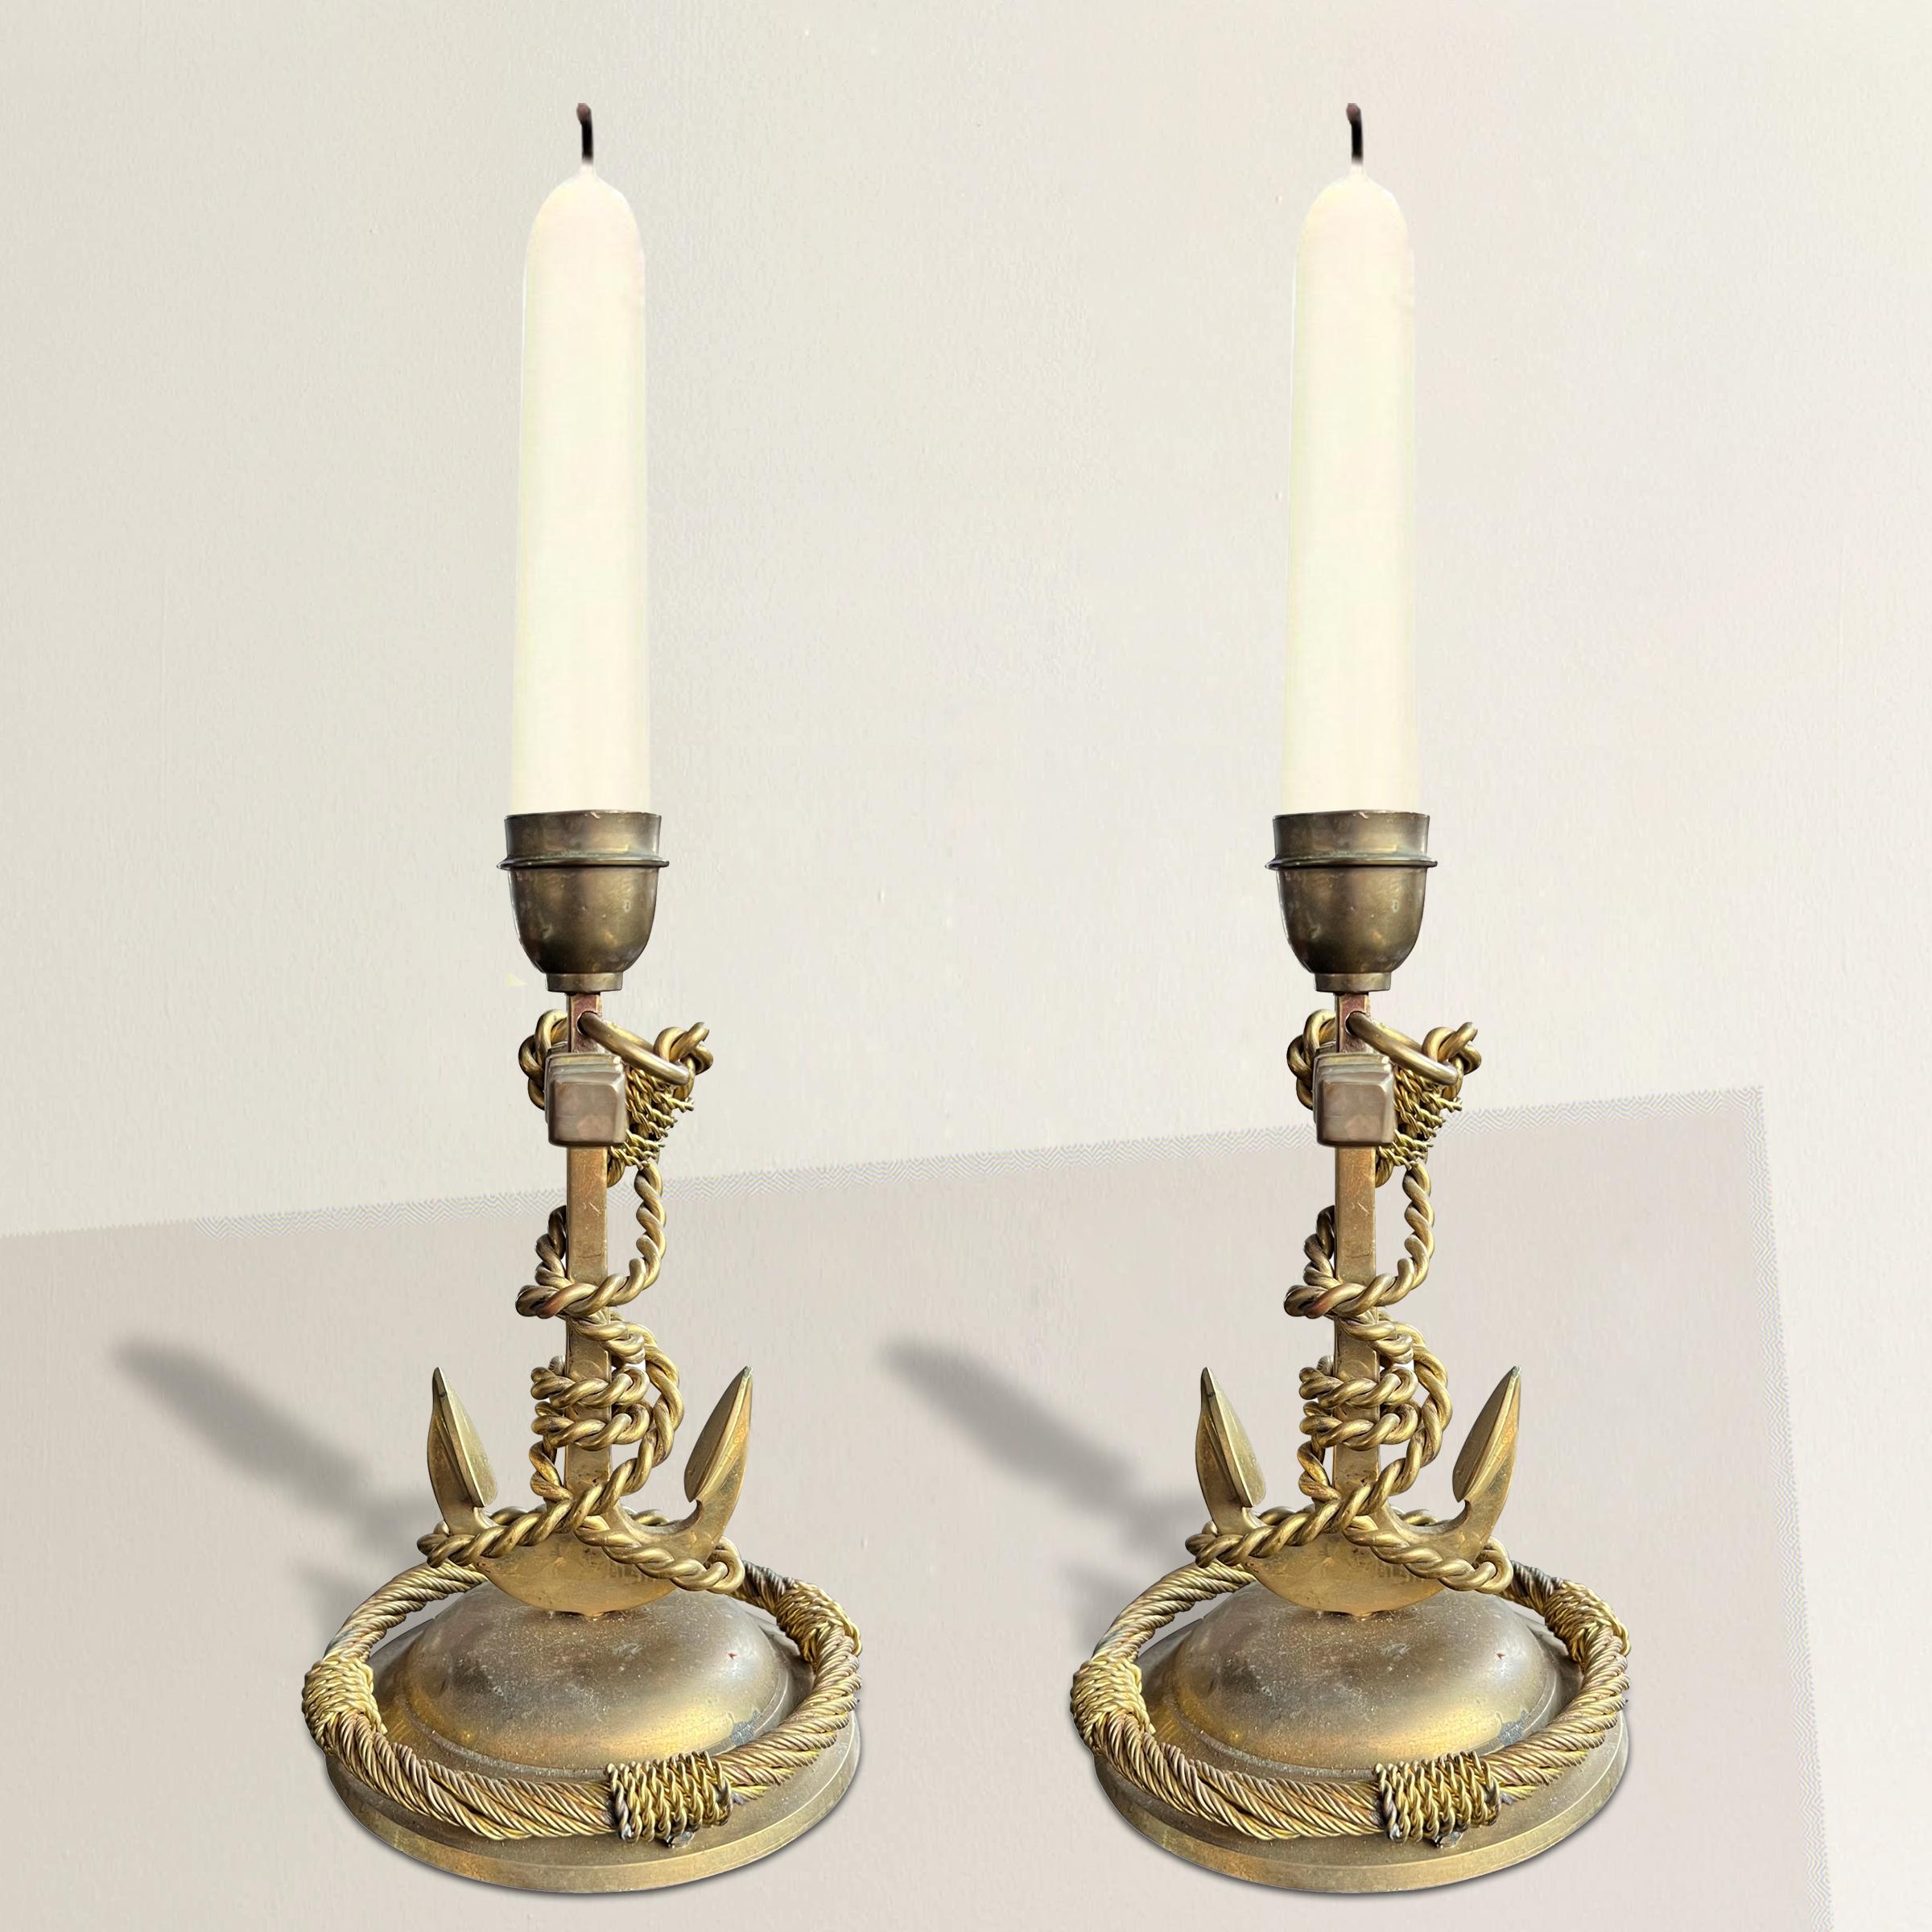 These exquisite vintage English brass candlesticks showcase a captivating anchor design that is sure to enchant any admirer of fine craftsmanship. Fashioned in the form of anchors, these candlesticks exude a nautical charm with a touch of romance.